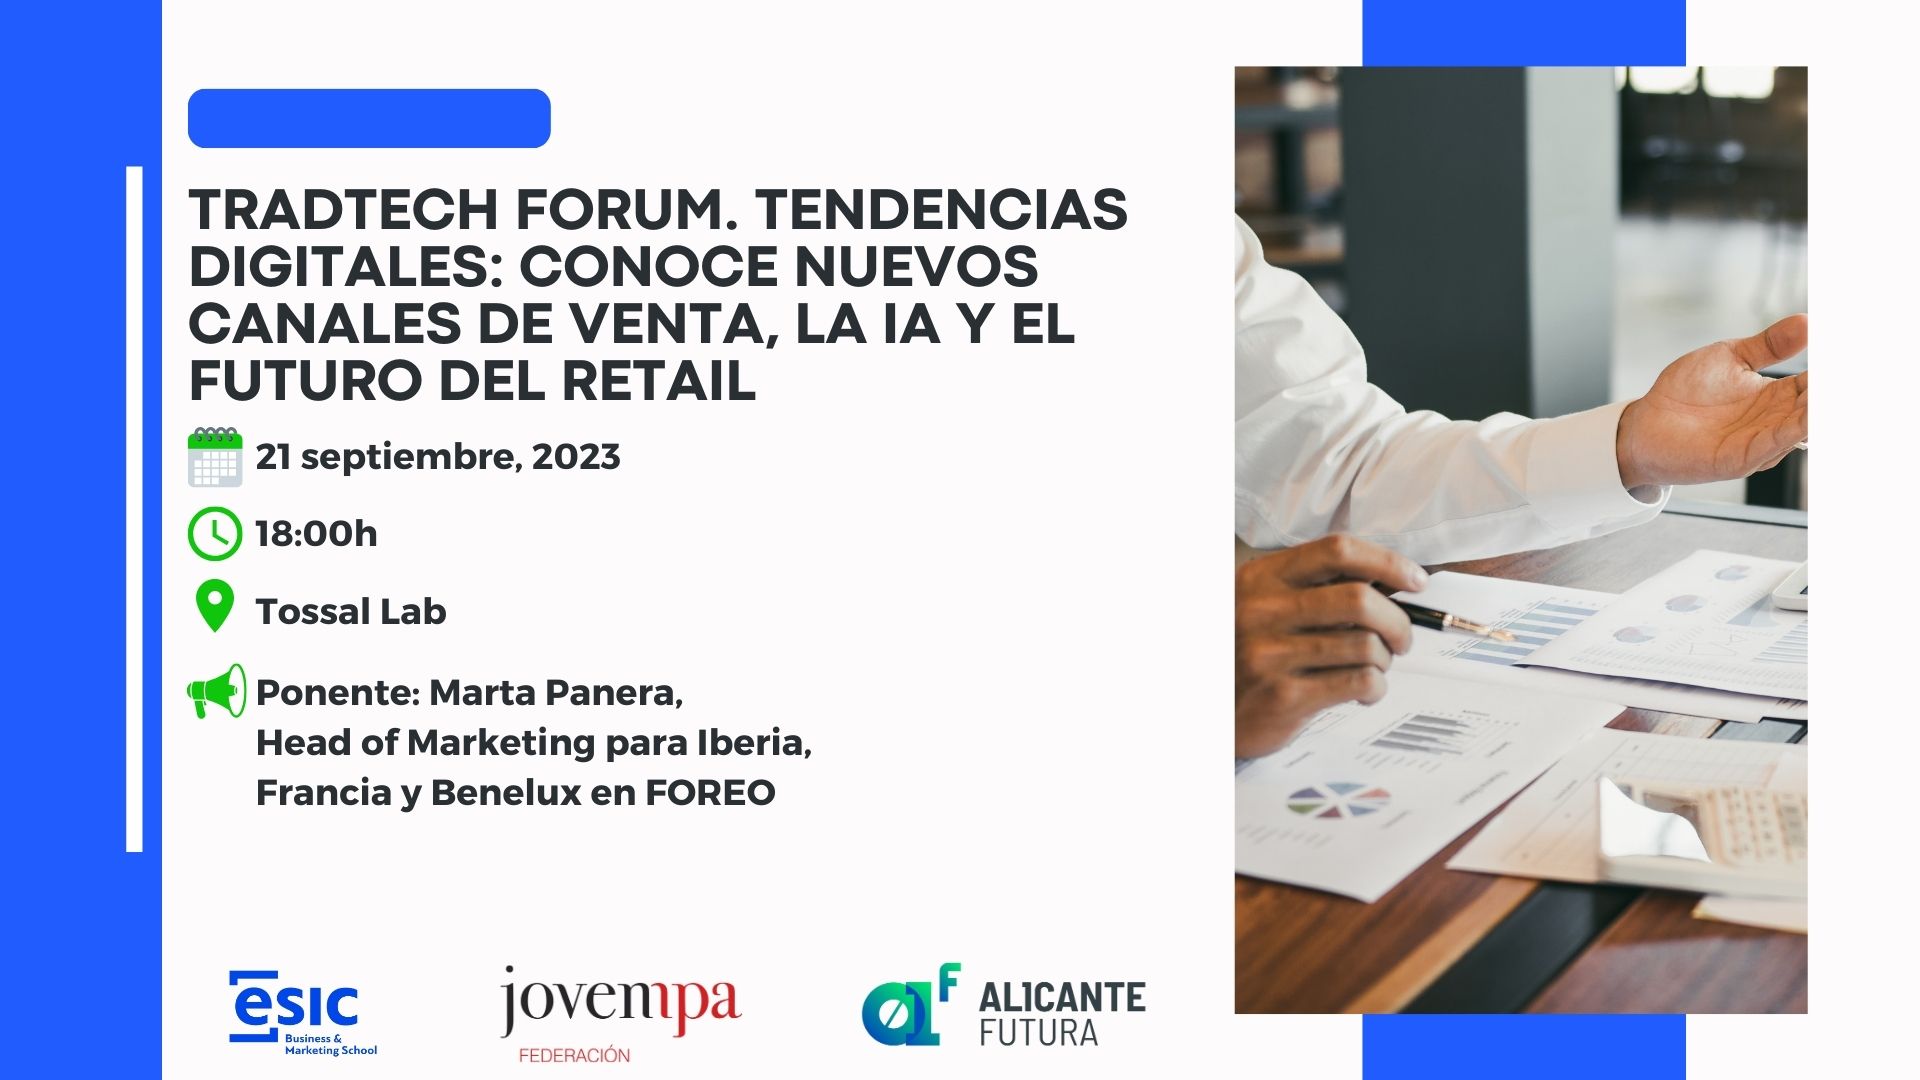 TRADTECH FORUM. Digital Trends: Learn about new sales channels, AI and the Future of Retail.